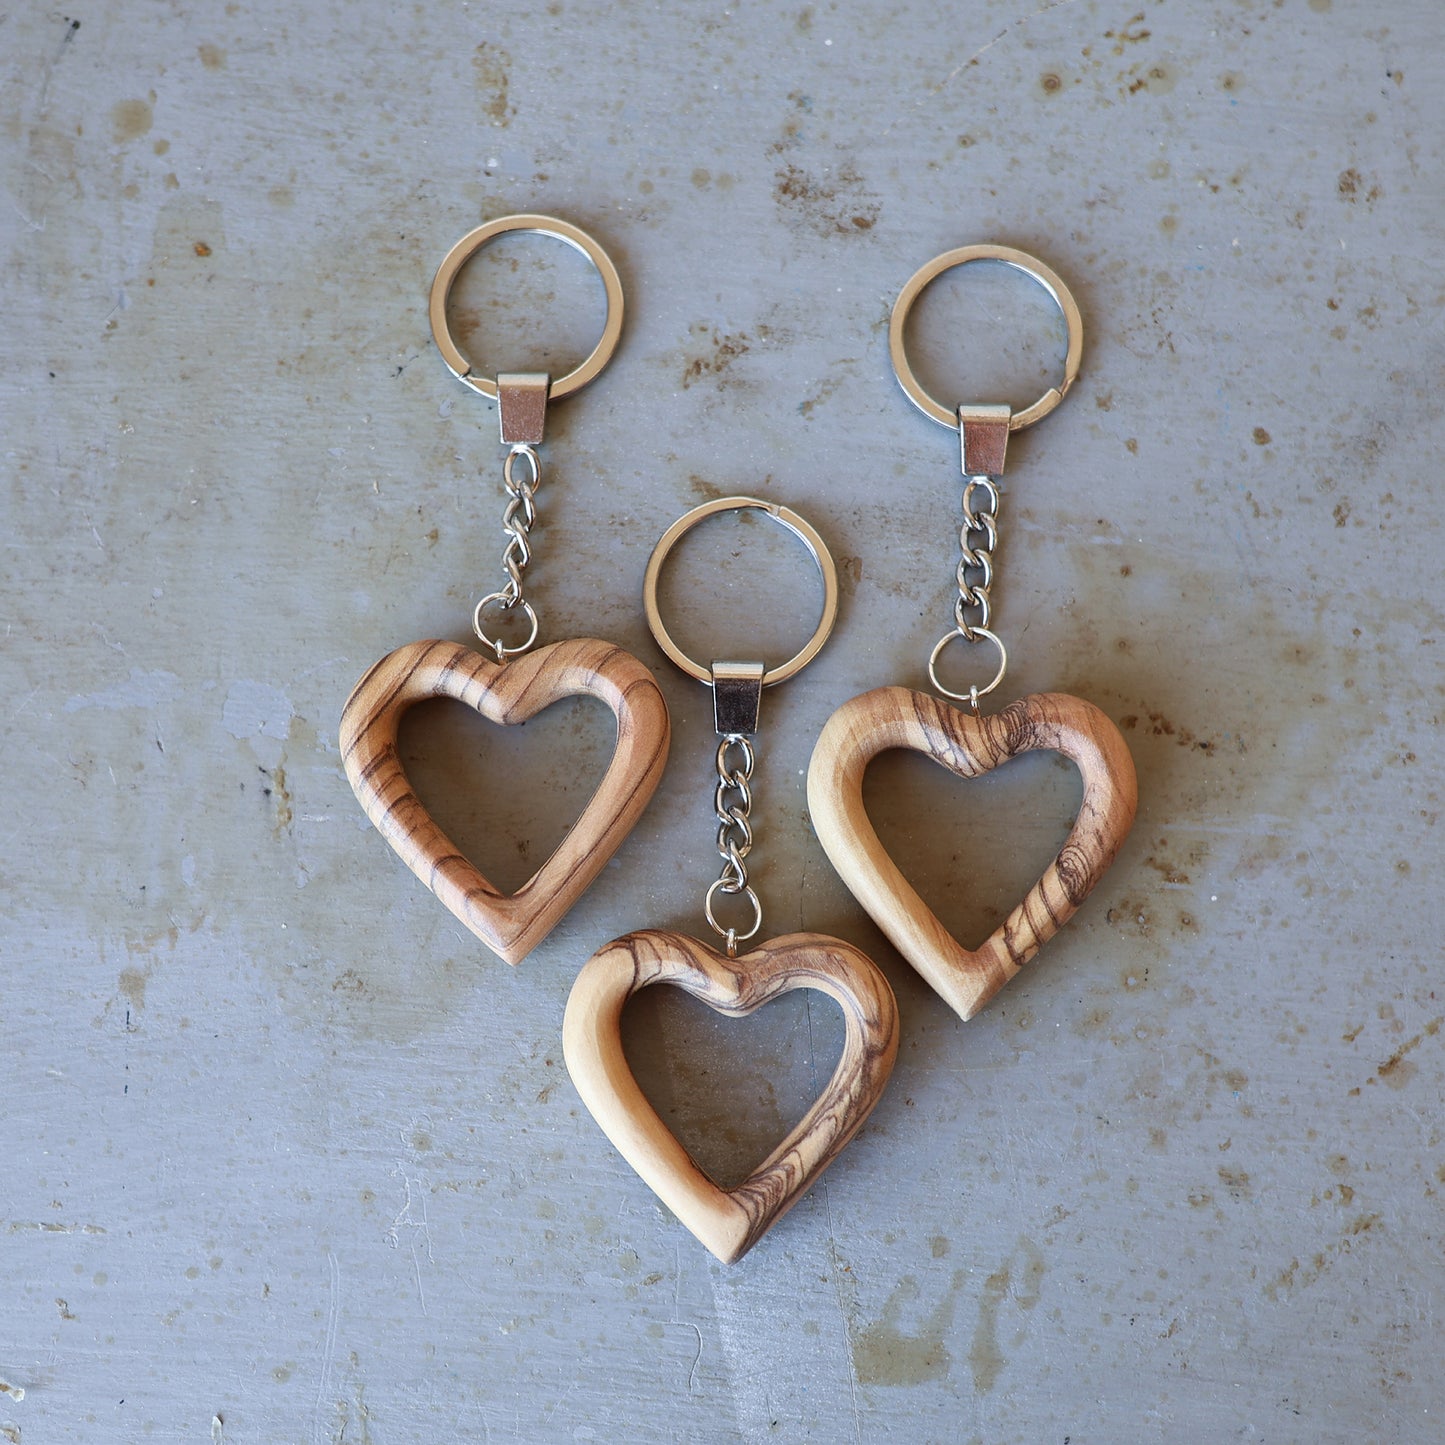 Heart Keychains From The Holy Land